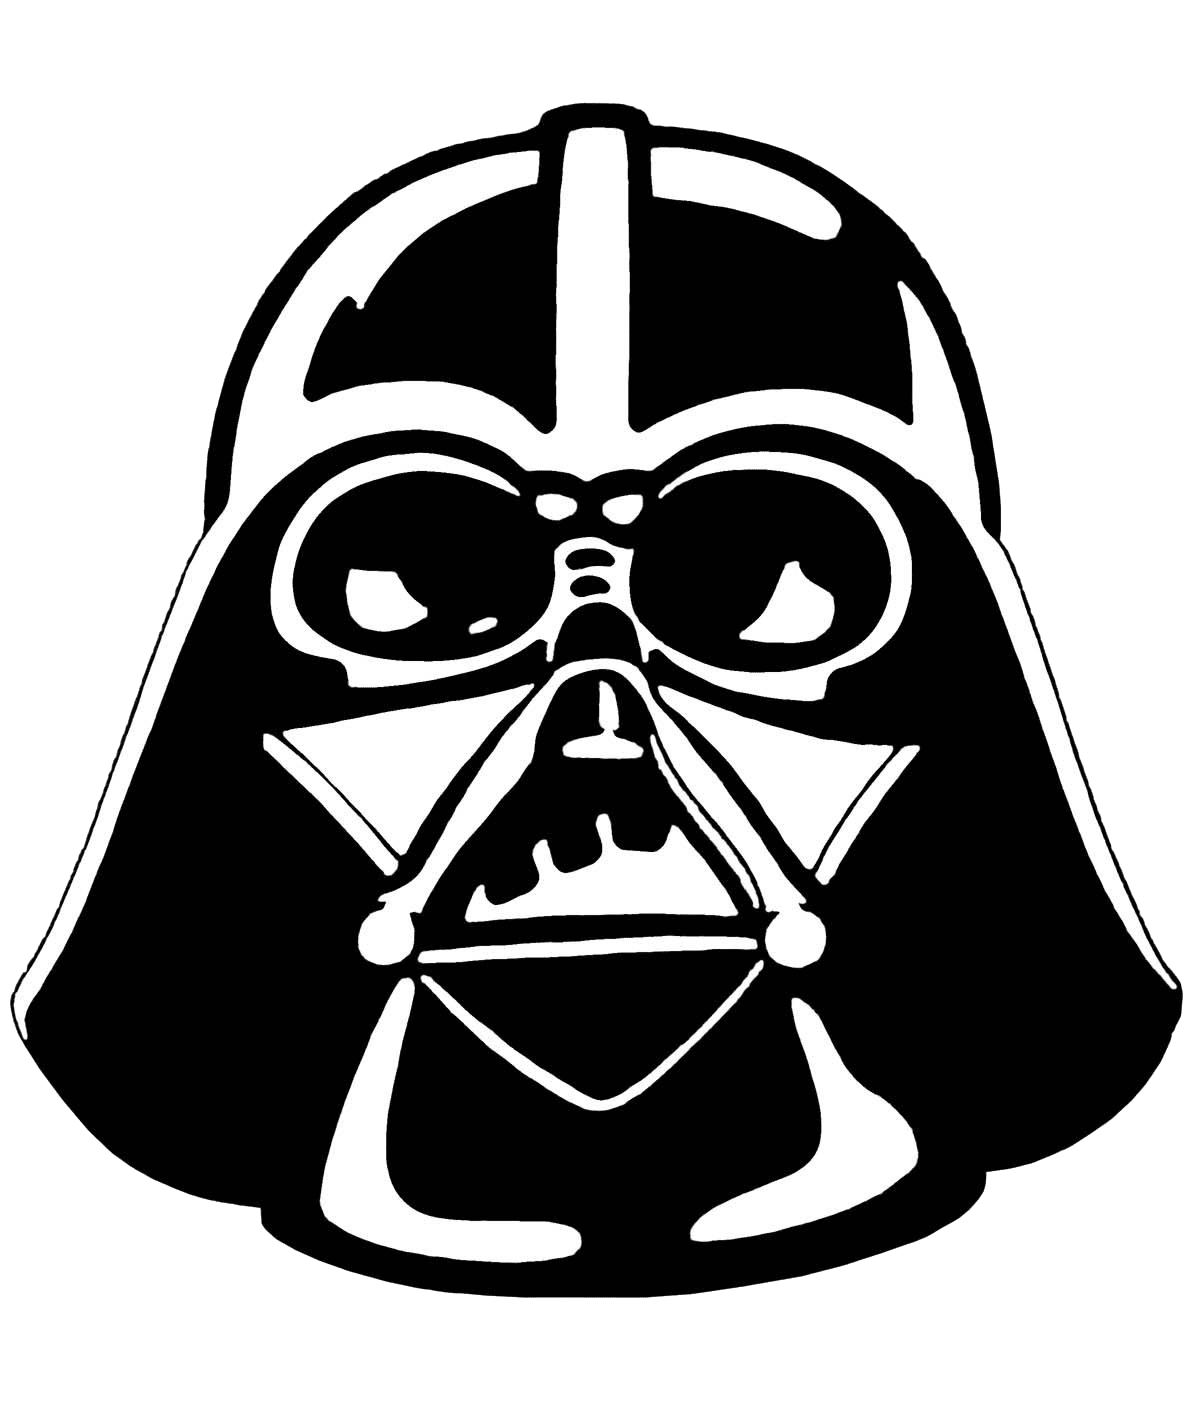 Darth Vader Black and White Clipart